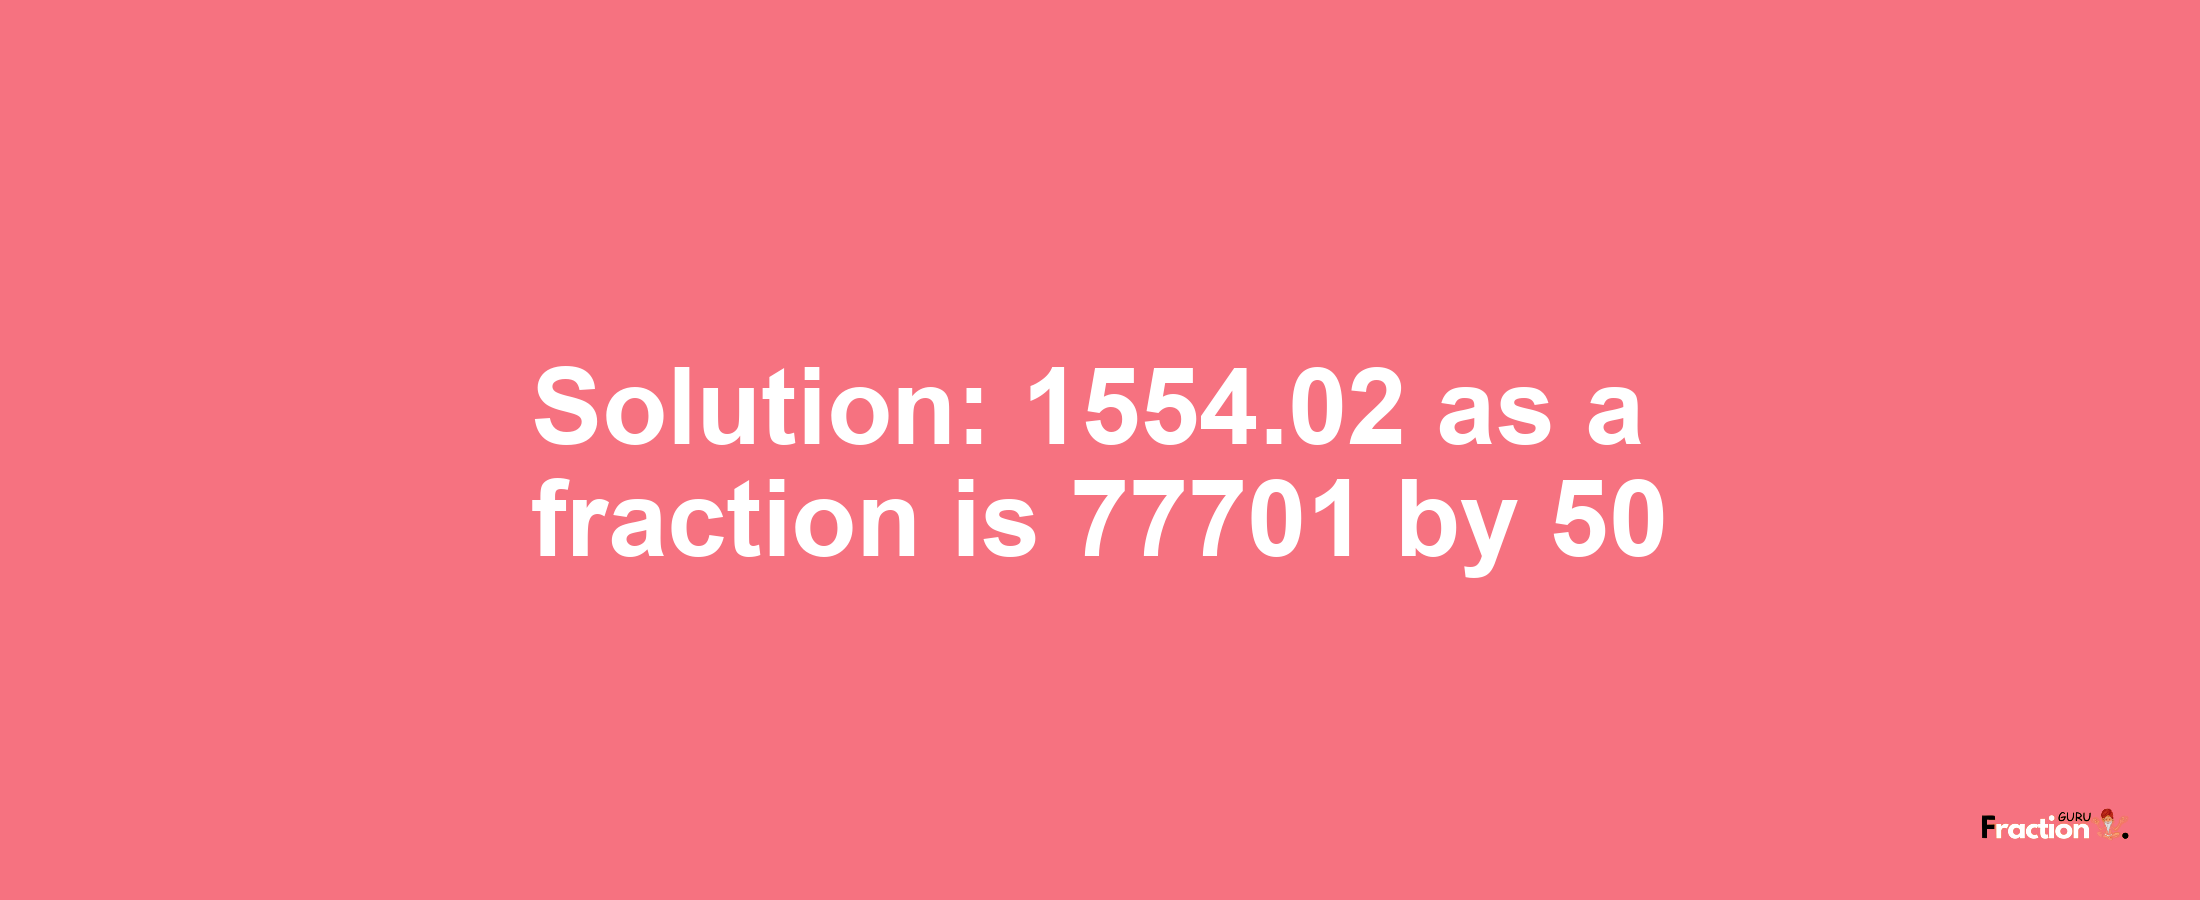 Solution:1554.02 as a fraction is 77701/50